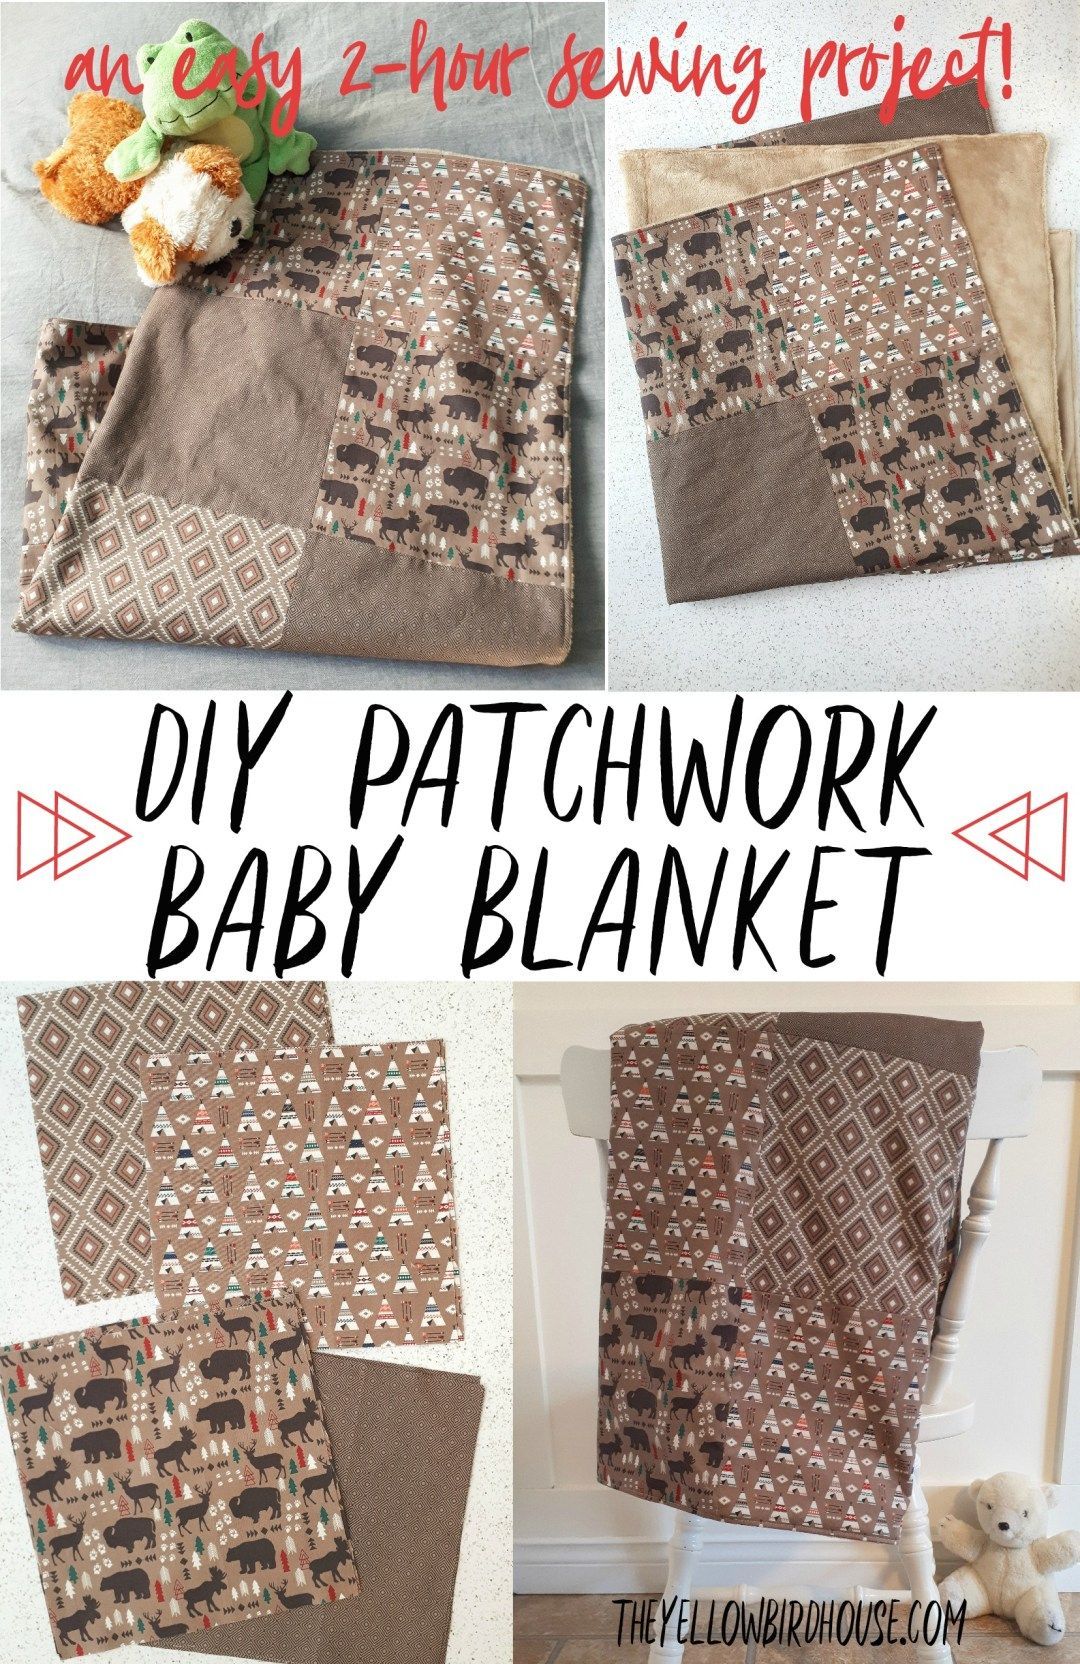 DIY Patchwork Baby Blanket - 2 Hour Sewing Project -   22 fabric crafts Easy fat quarters ideas